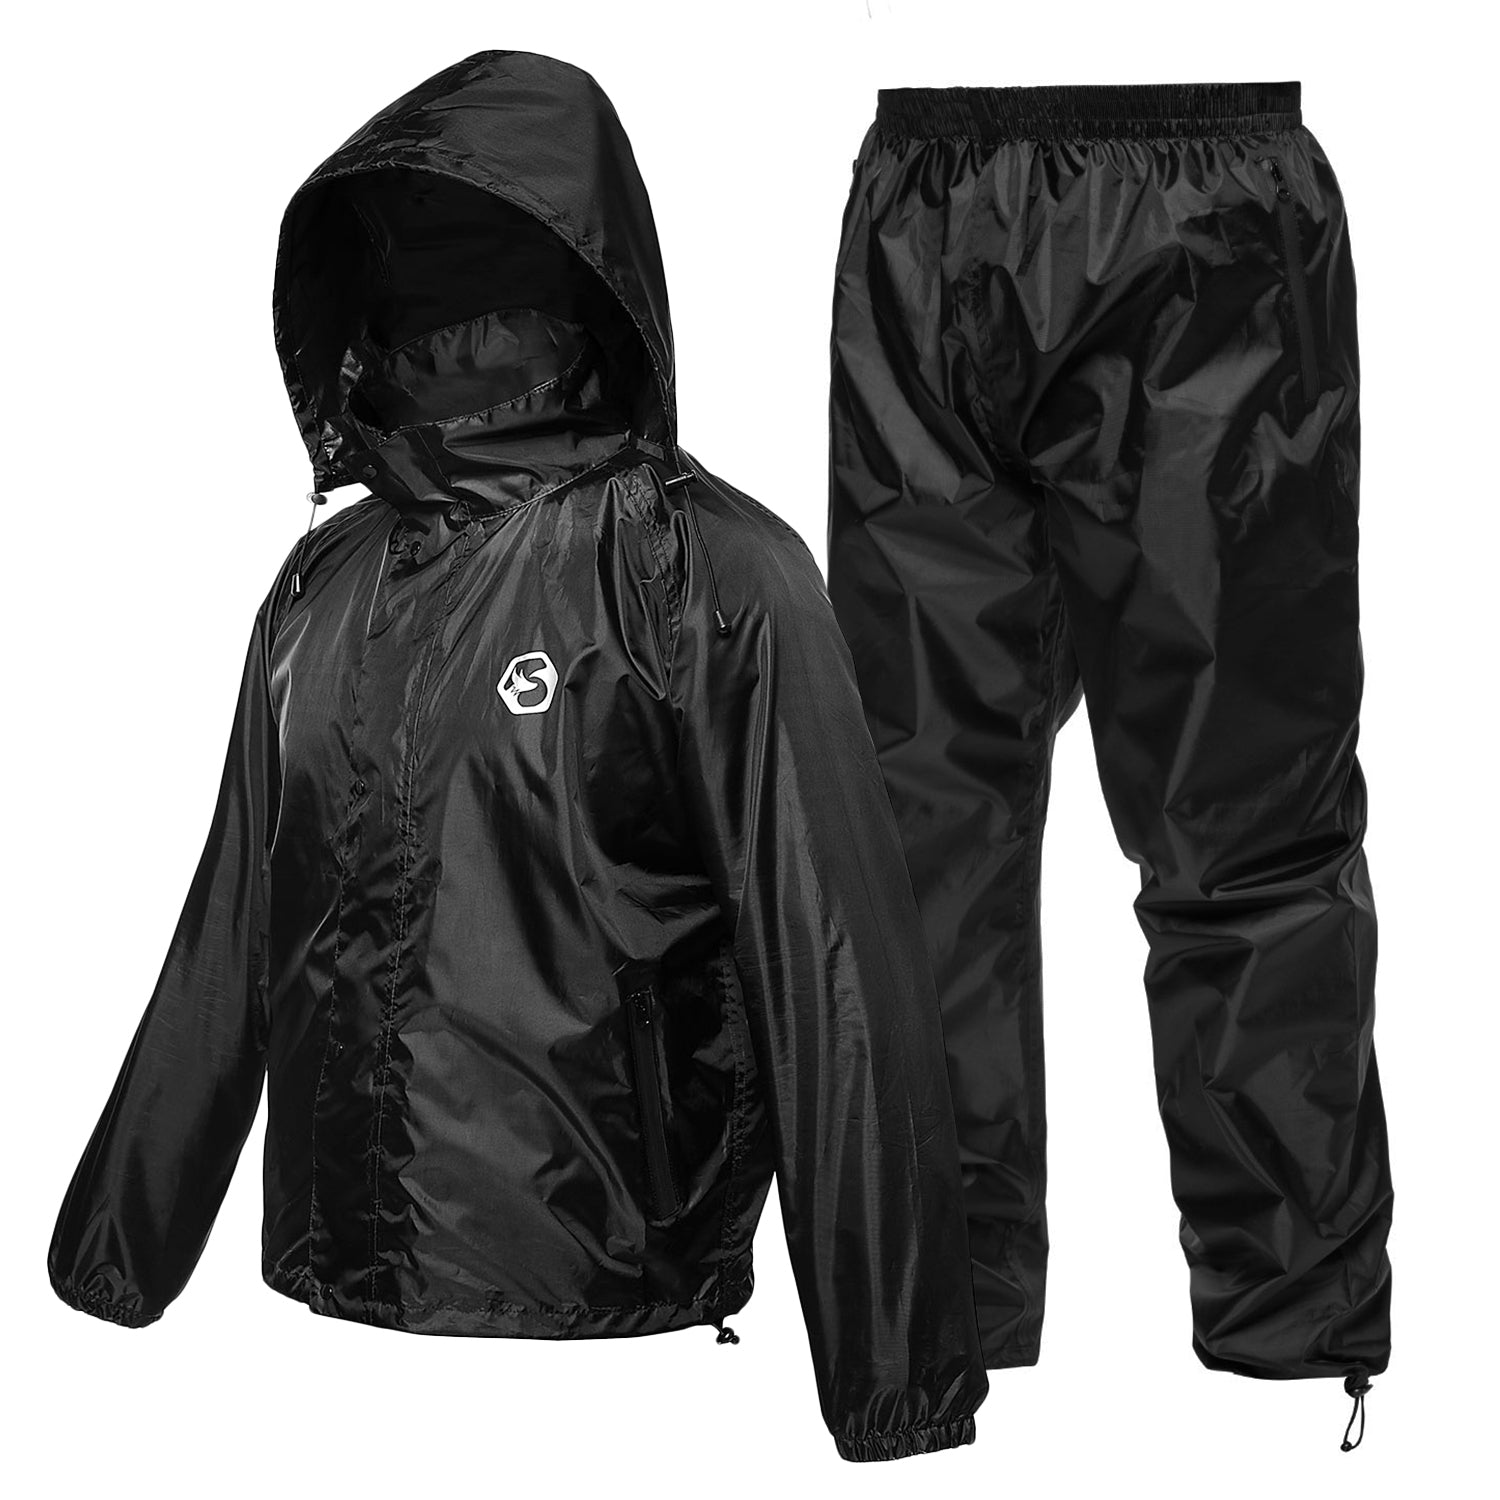 Nike Waterproof Jacket and Pant from Wave One Sports.